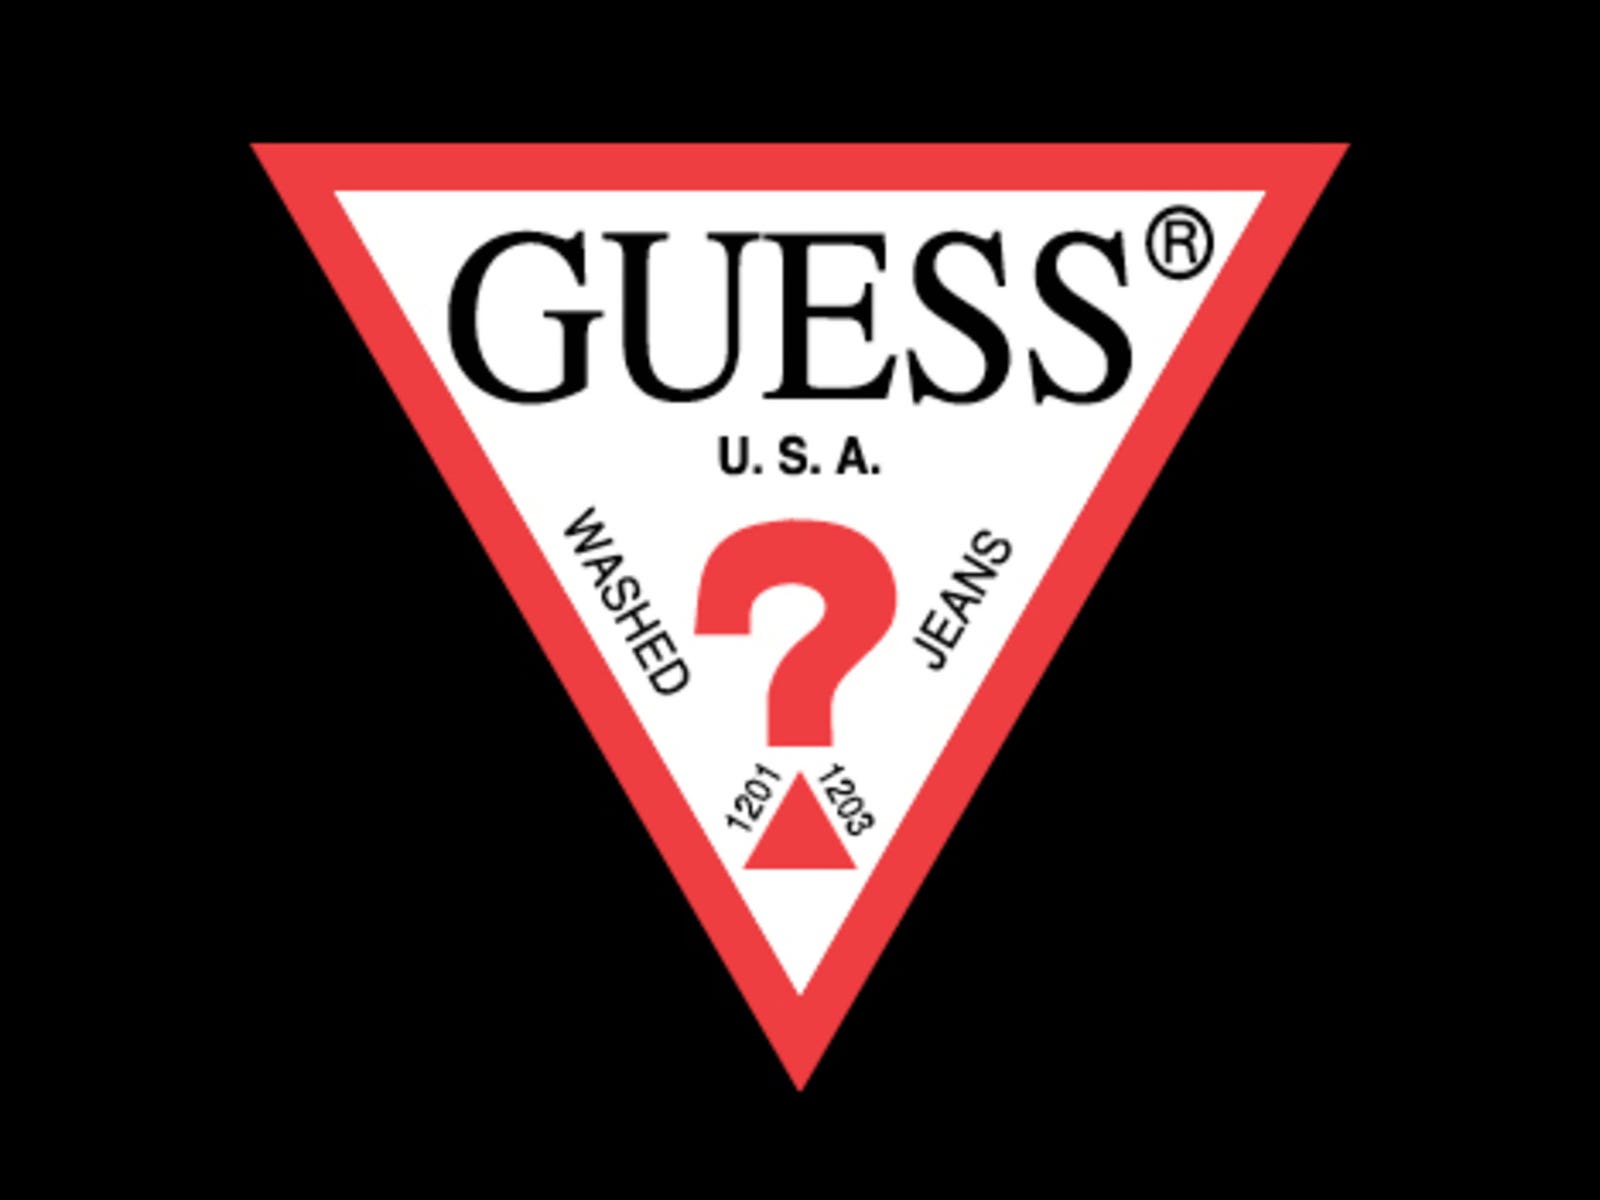 Guess factory. Guess. Guess Factory логотип. Guess картинки. Guess обои.